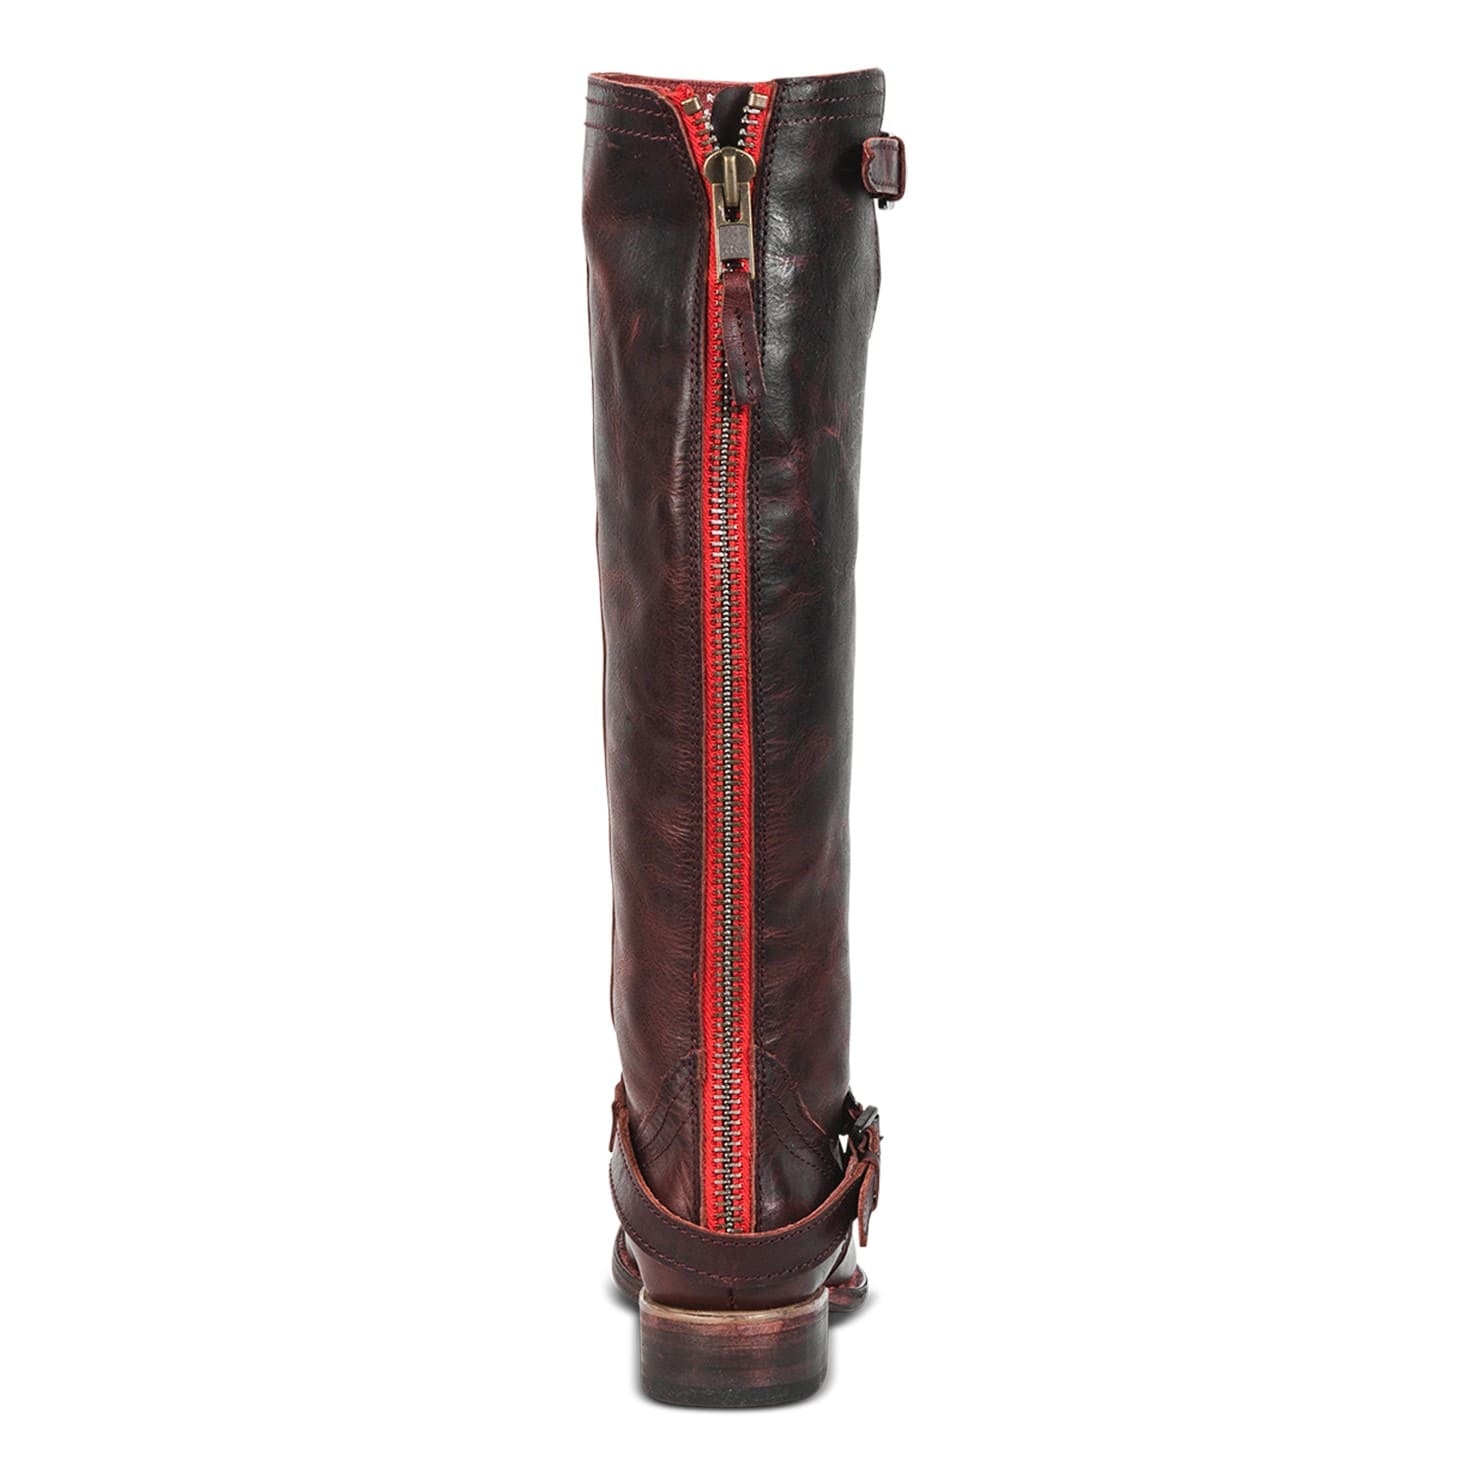 Back view showing working red tracked zipper with pull tab on FREEBIRD women's Roadey wine tall leather boot 